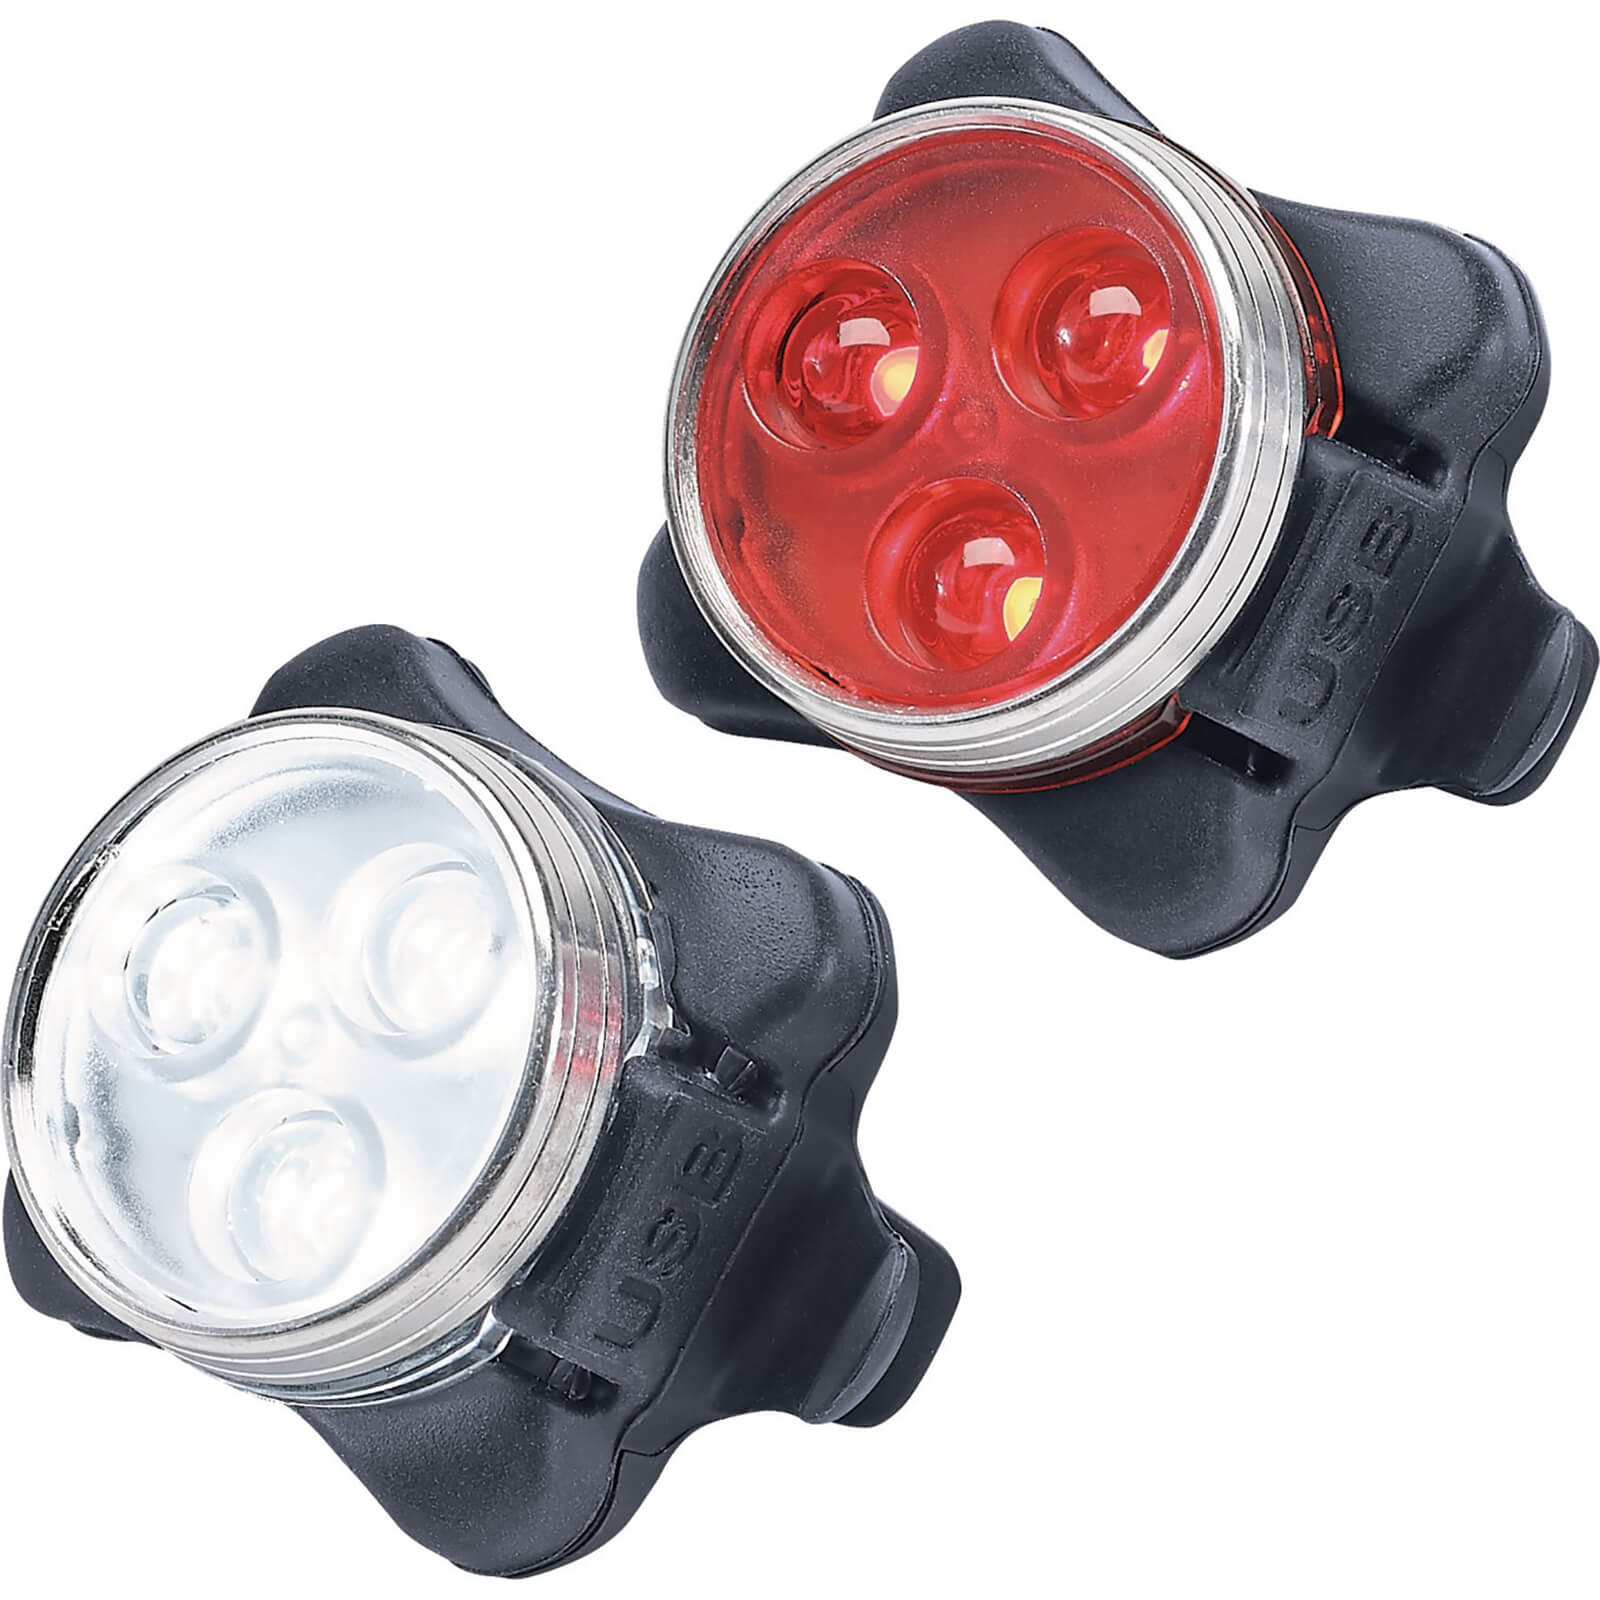 Image of Draper Rechargeable Led Bicycle Light Set